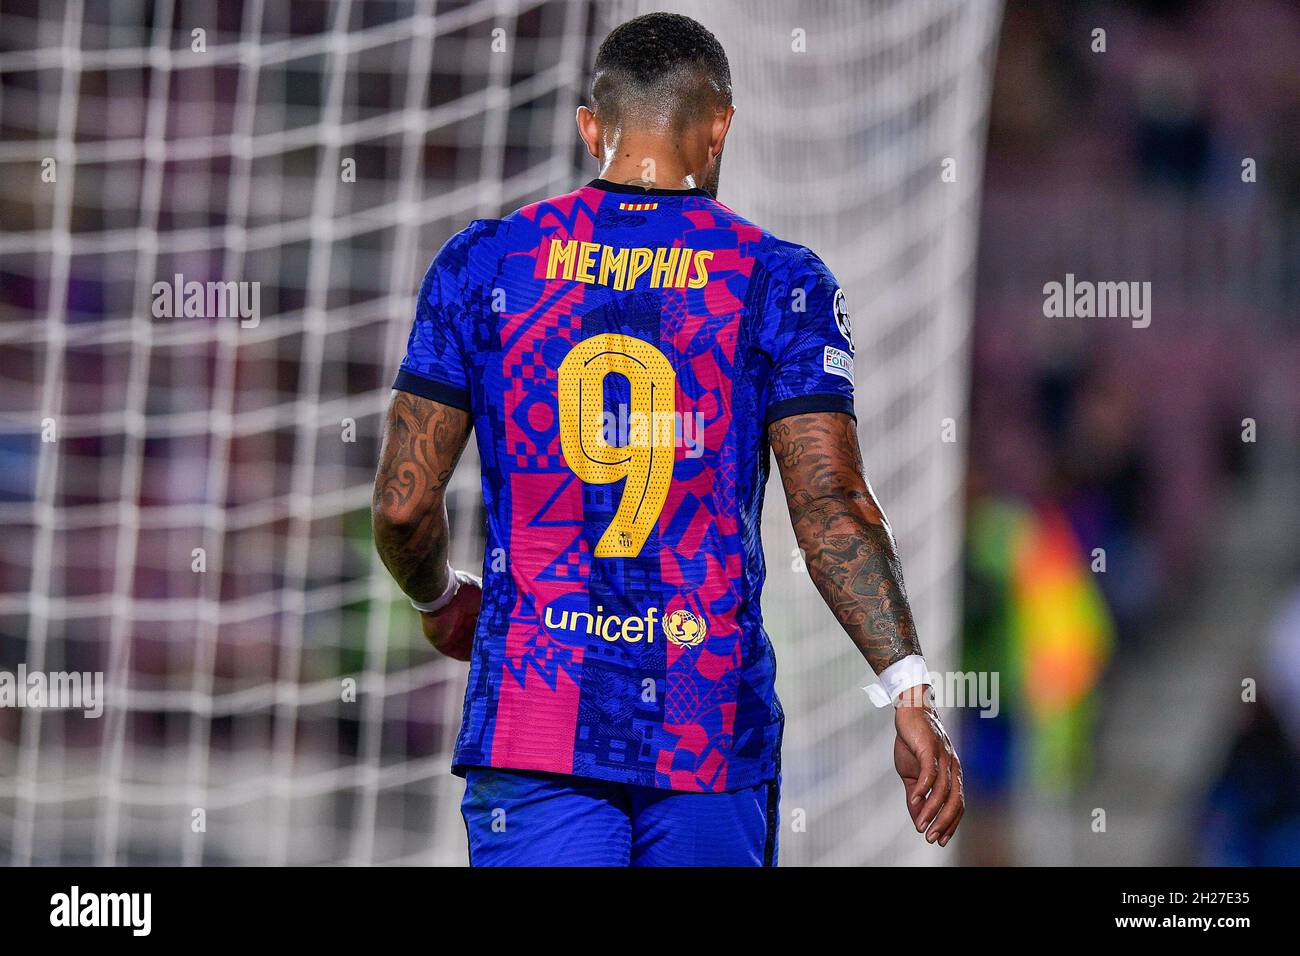 BARCELONA, SPAIN - OCTOBER 20: Memphis Depay of FC Barcelona during the  Group E - UEFA Champions League match between FC Barcelona and Dinamo Kiev  at the Camp Nou on October 20,